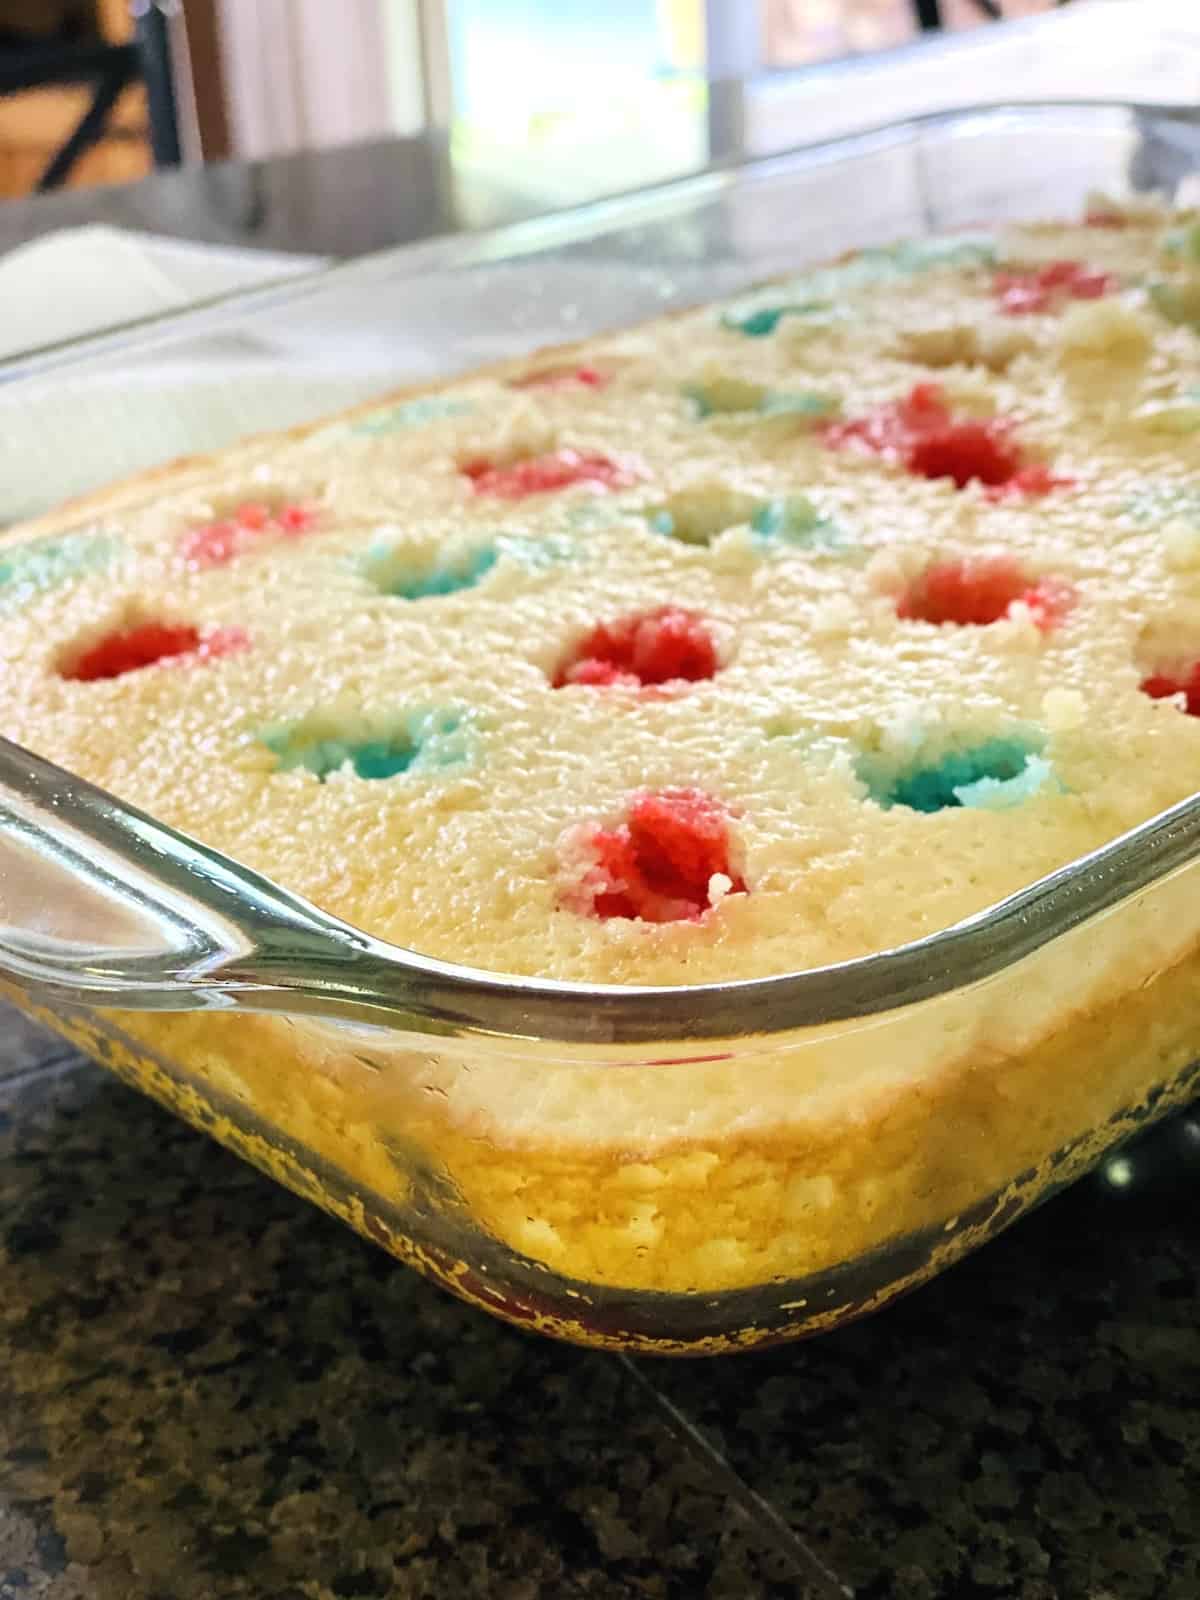 All the holes of the white caked filled with the red or blue Jello.